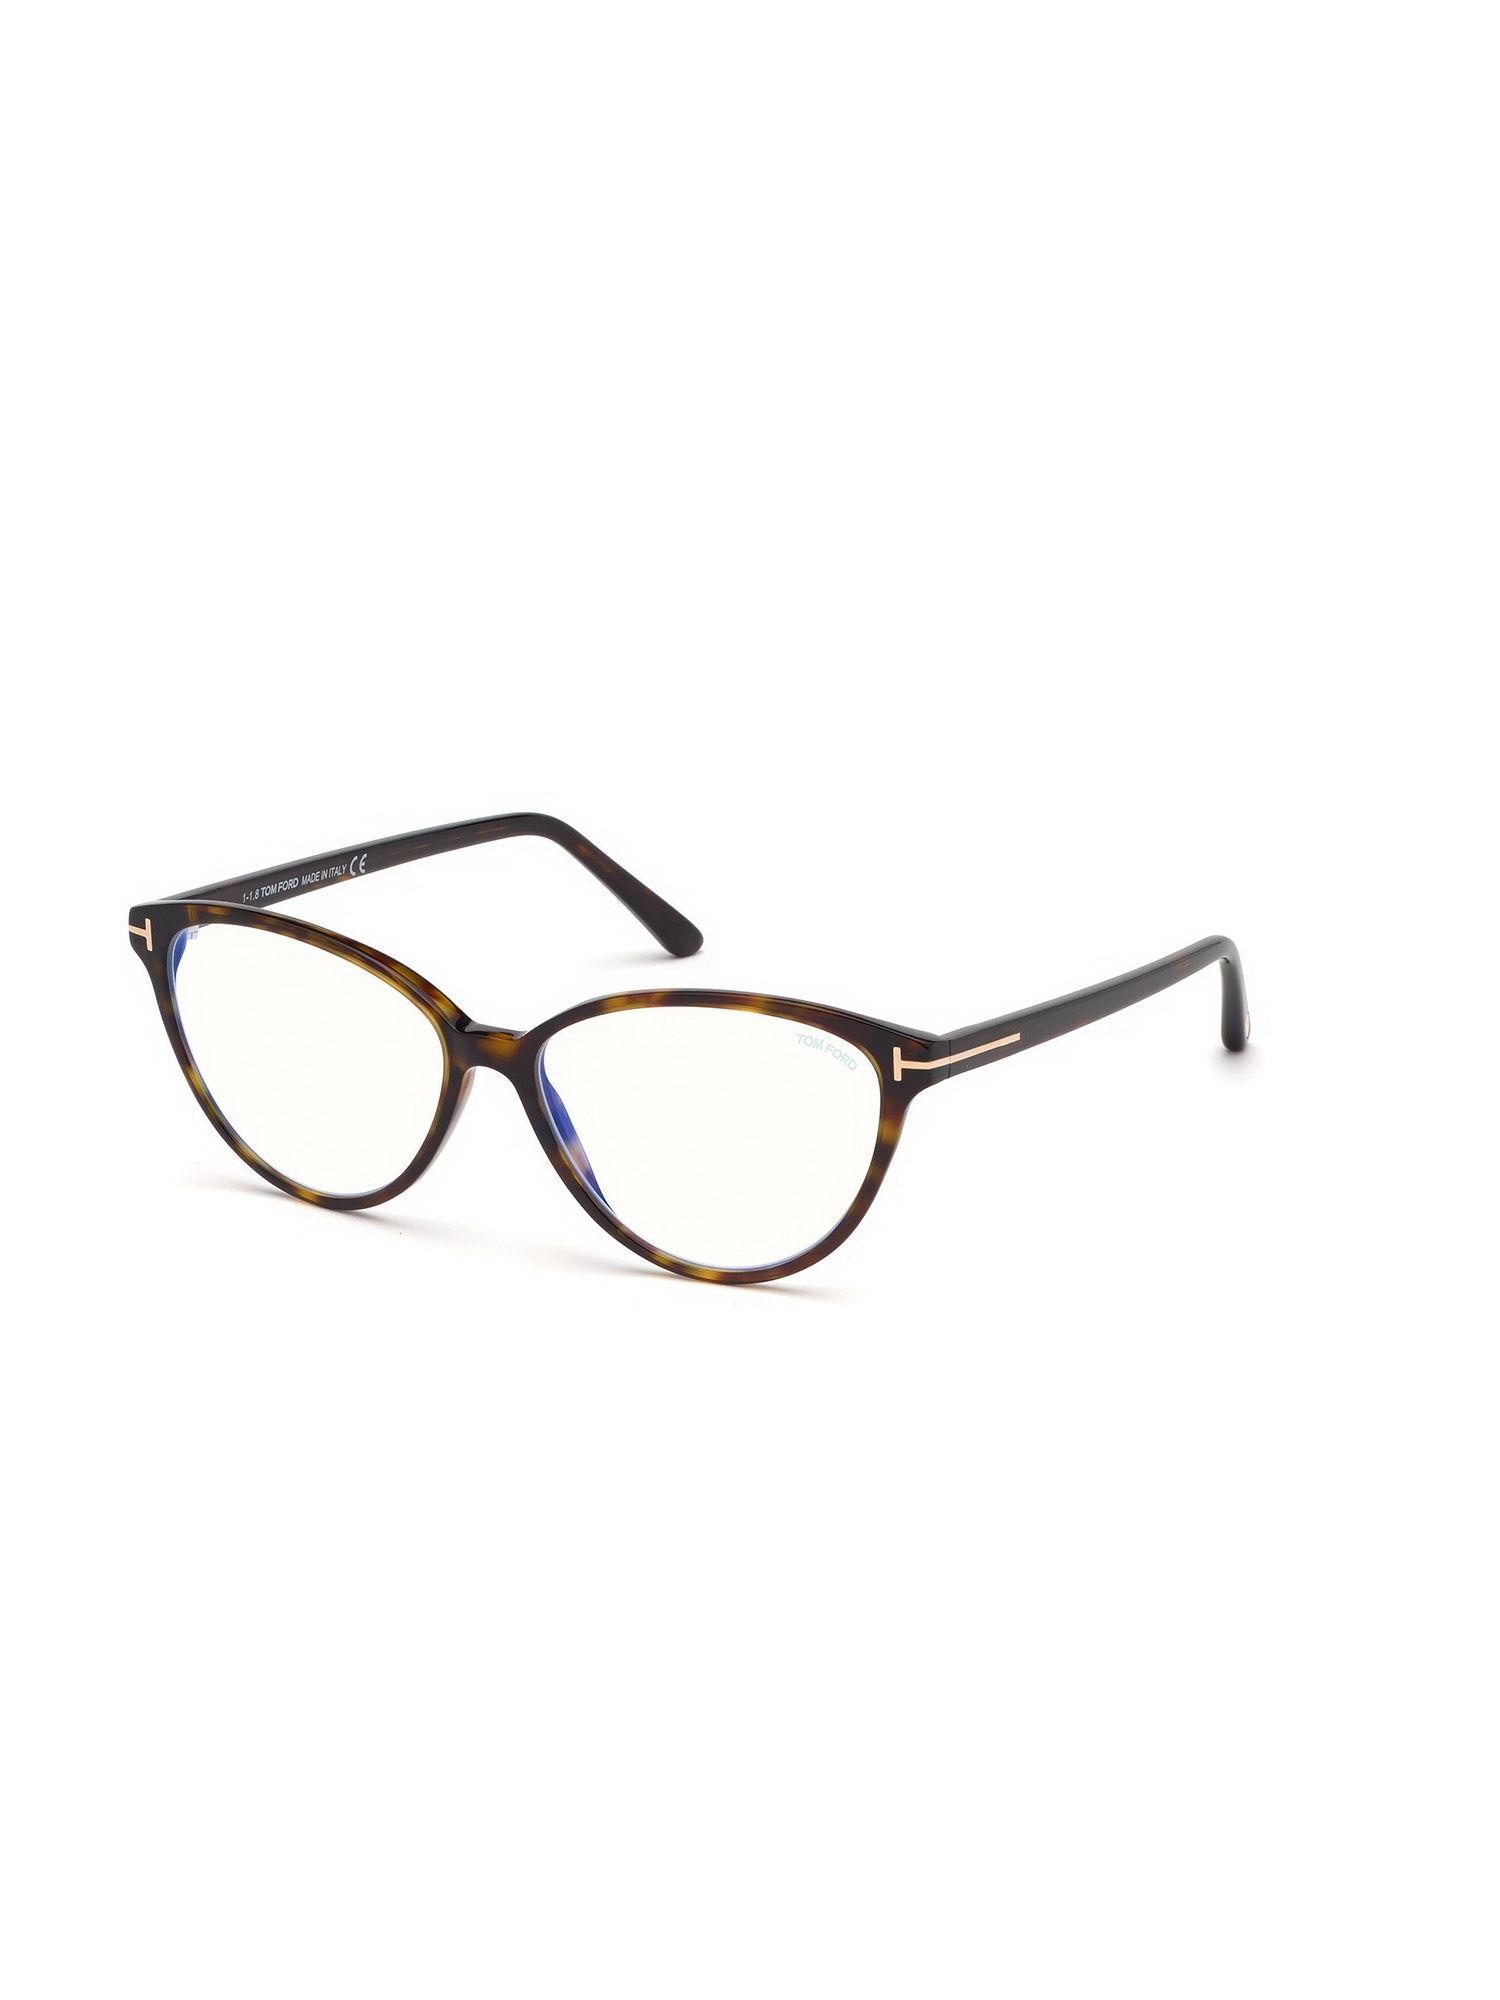 ft5545-b-55-052-is-a-selection-of-iconic-cat-eye-shapes-in-premium-men-sunglasses